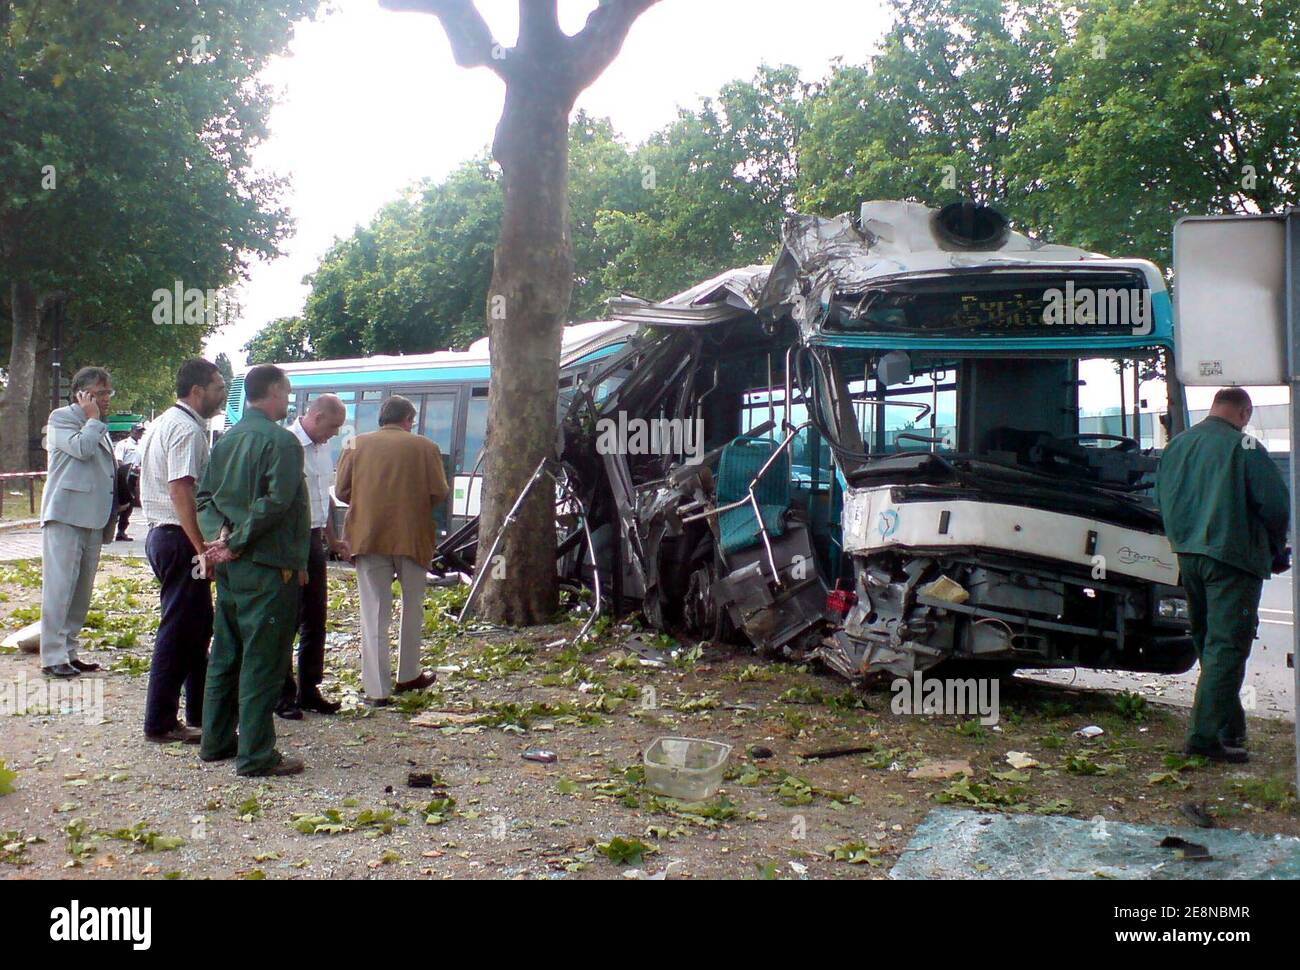 Police crash officers look at the scene after a Parisian RATP bus carrying more than 19 people was involved in a crash near 'Porte de la Villette' in Paris, France on August 13, 2007. 14 are wounded and three are seriously injured. Photo by ABACAPRESS.COM Stock Photo